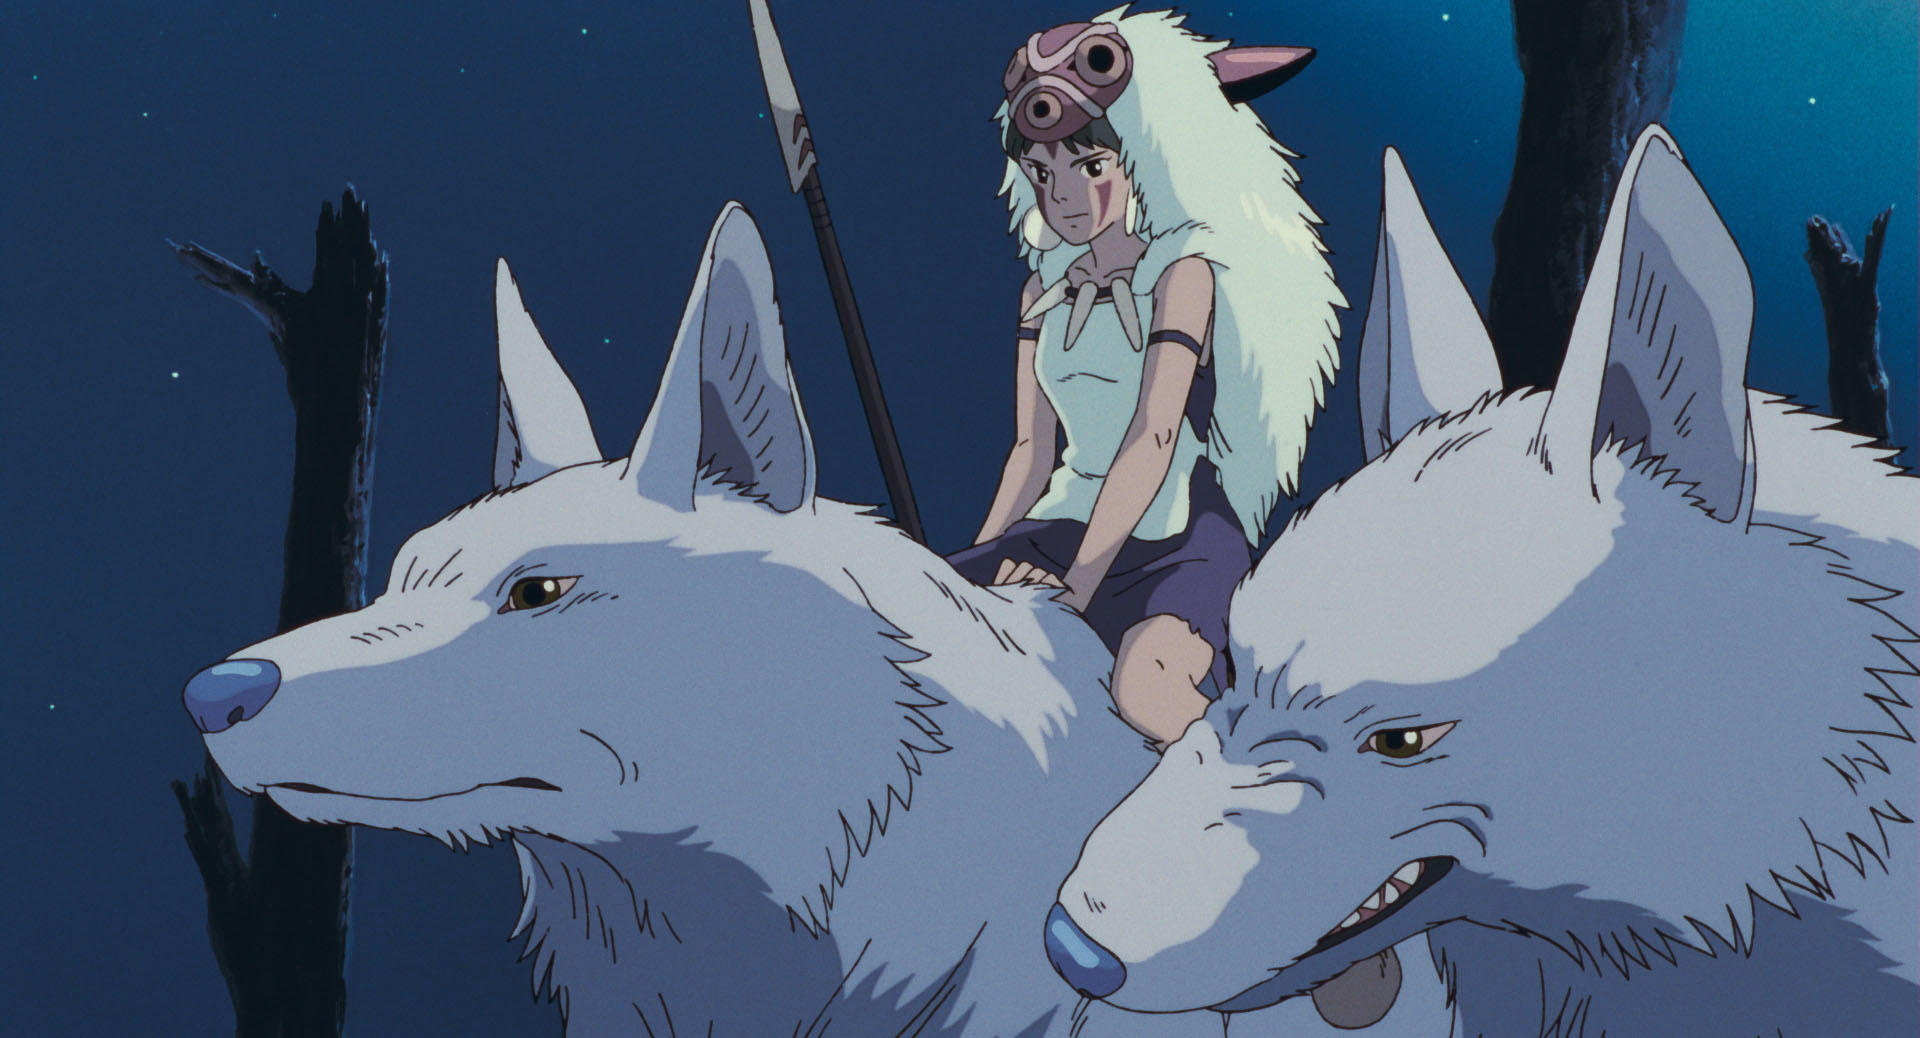 Studio Ghibli is finally on social media with unprecedented official Twitter account